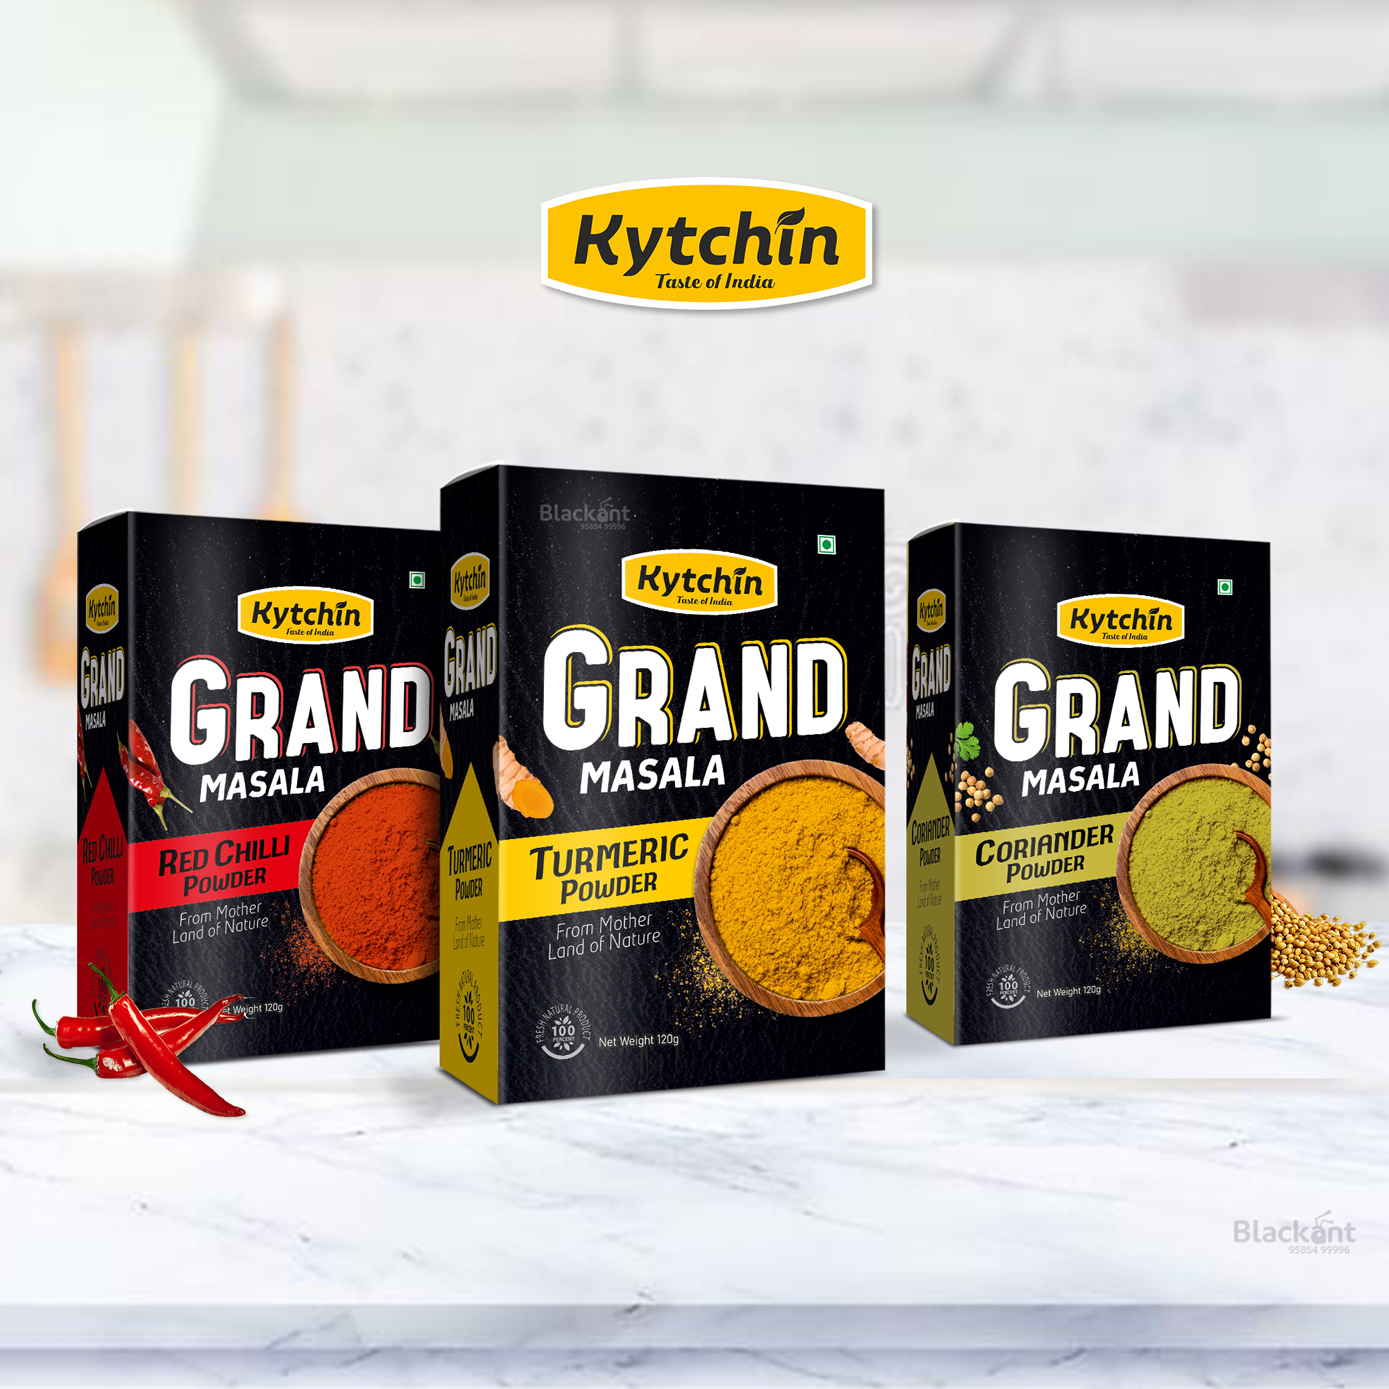 Masala Product Packaging Design